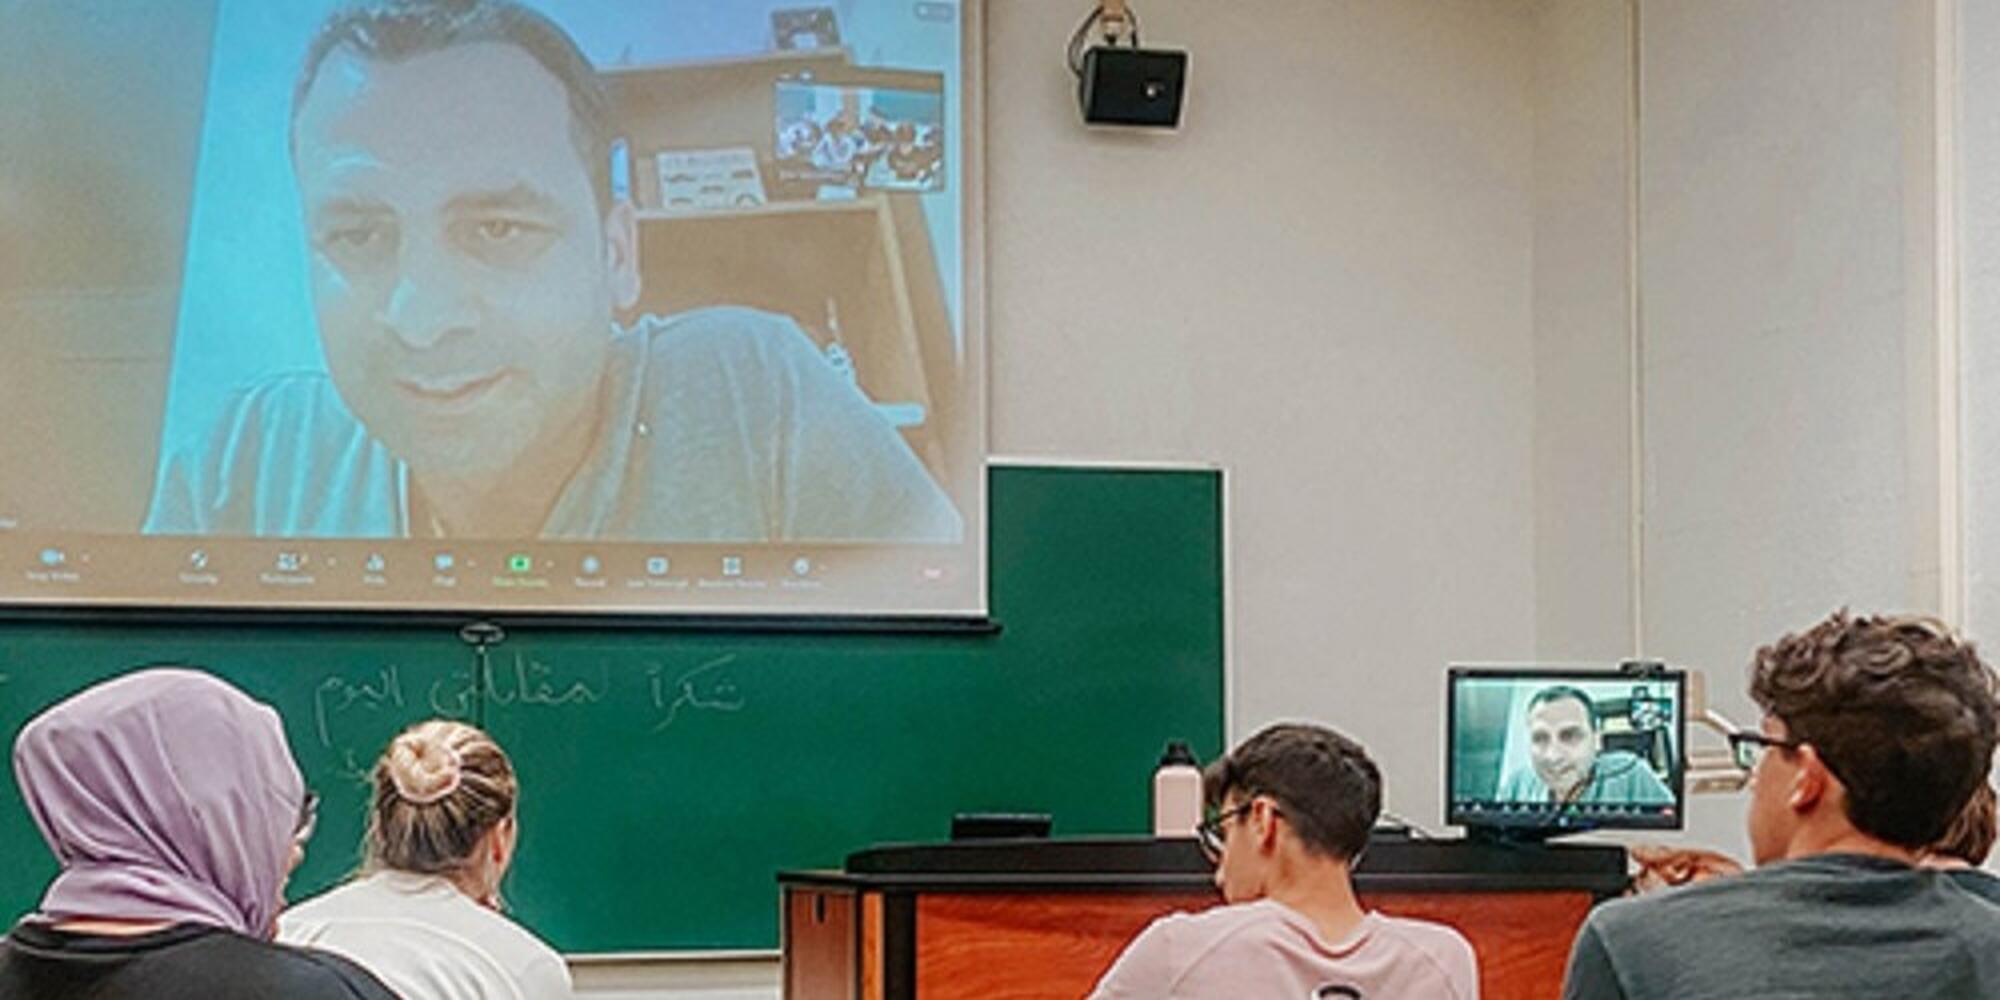 photo of classroom with students interact virtually with man